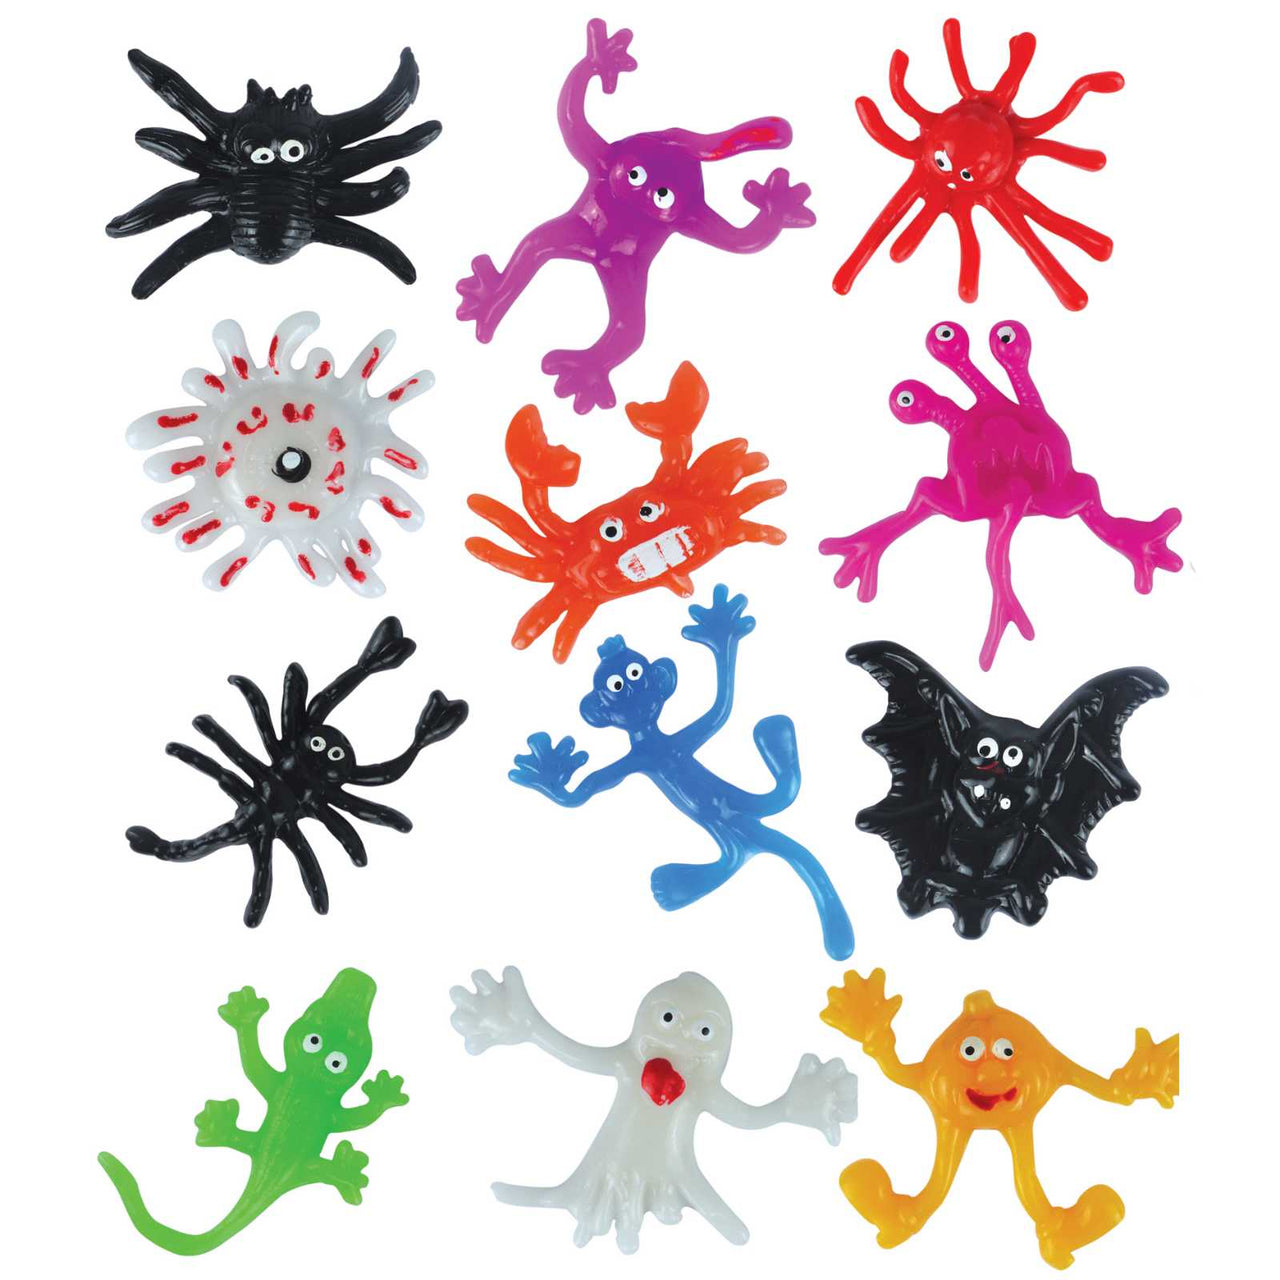 Sticky Slime Creatures Toy Assortment Sticky Creatures